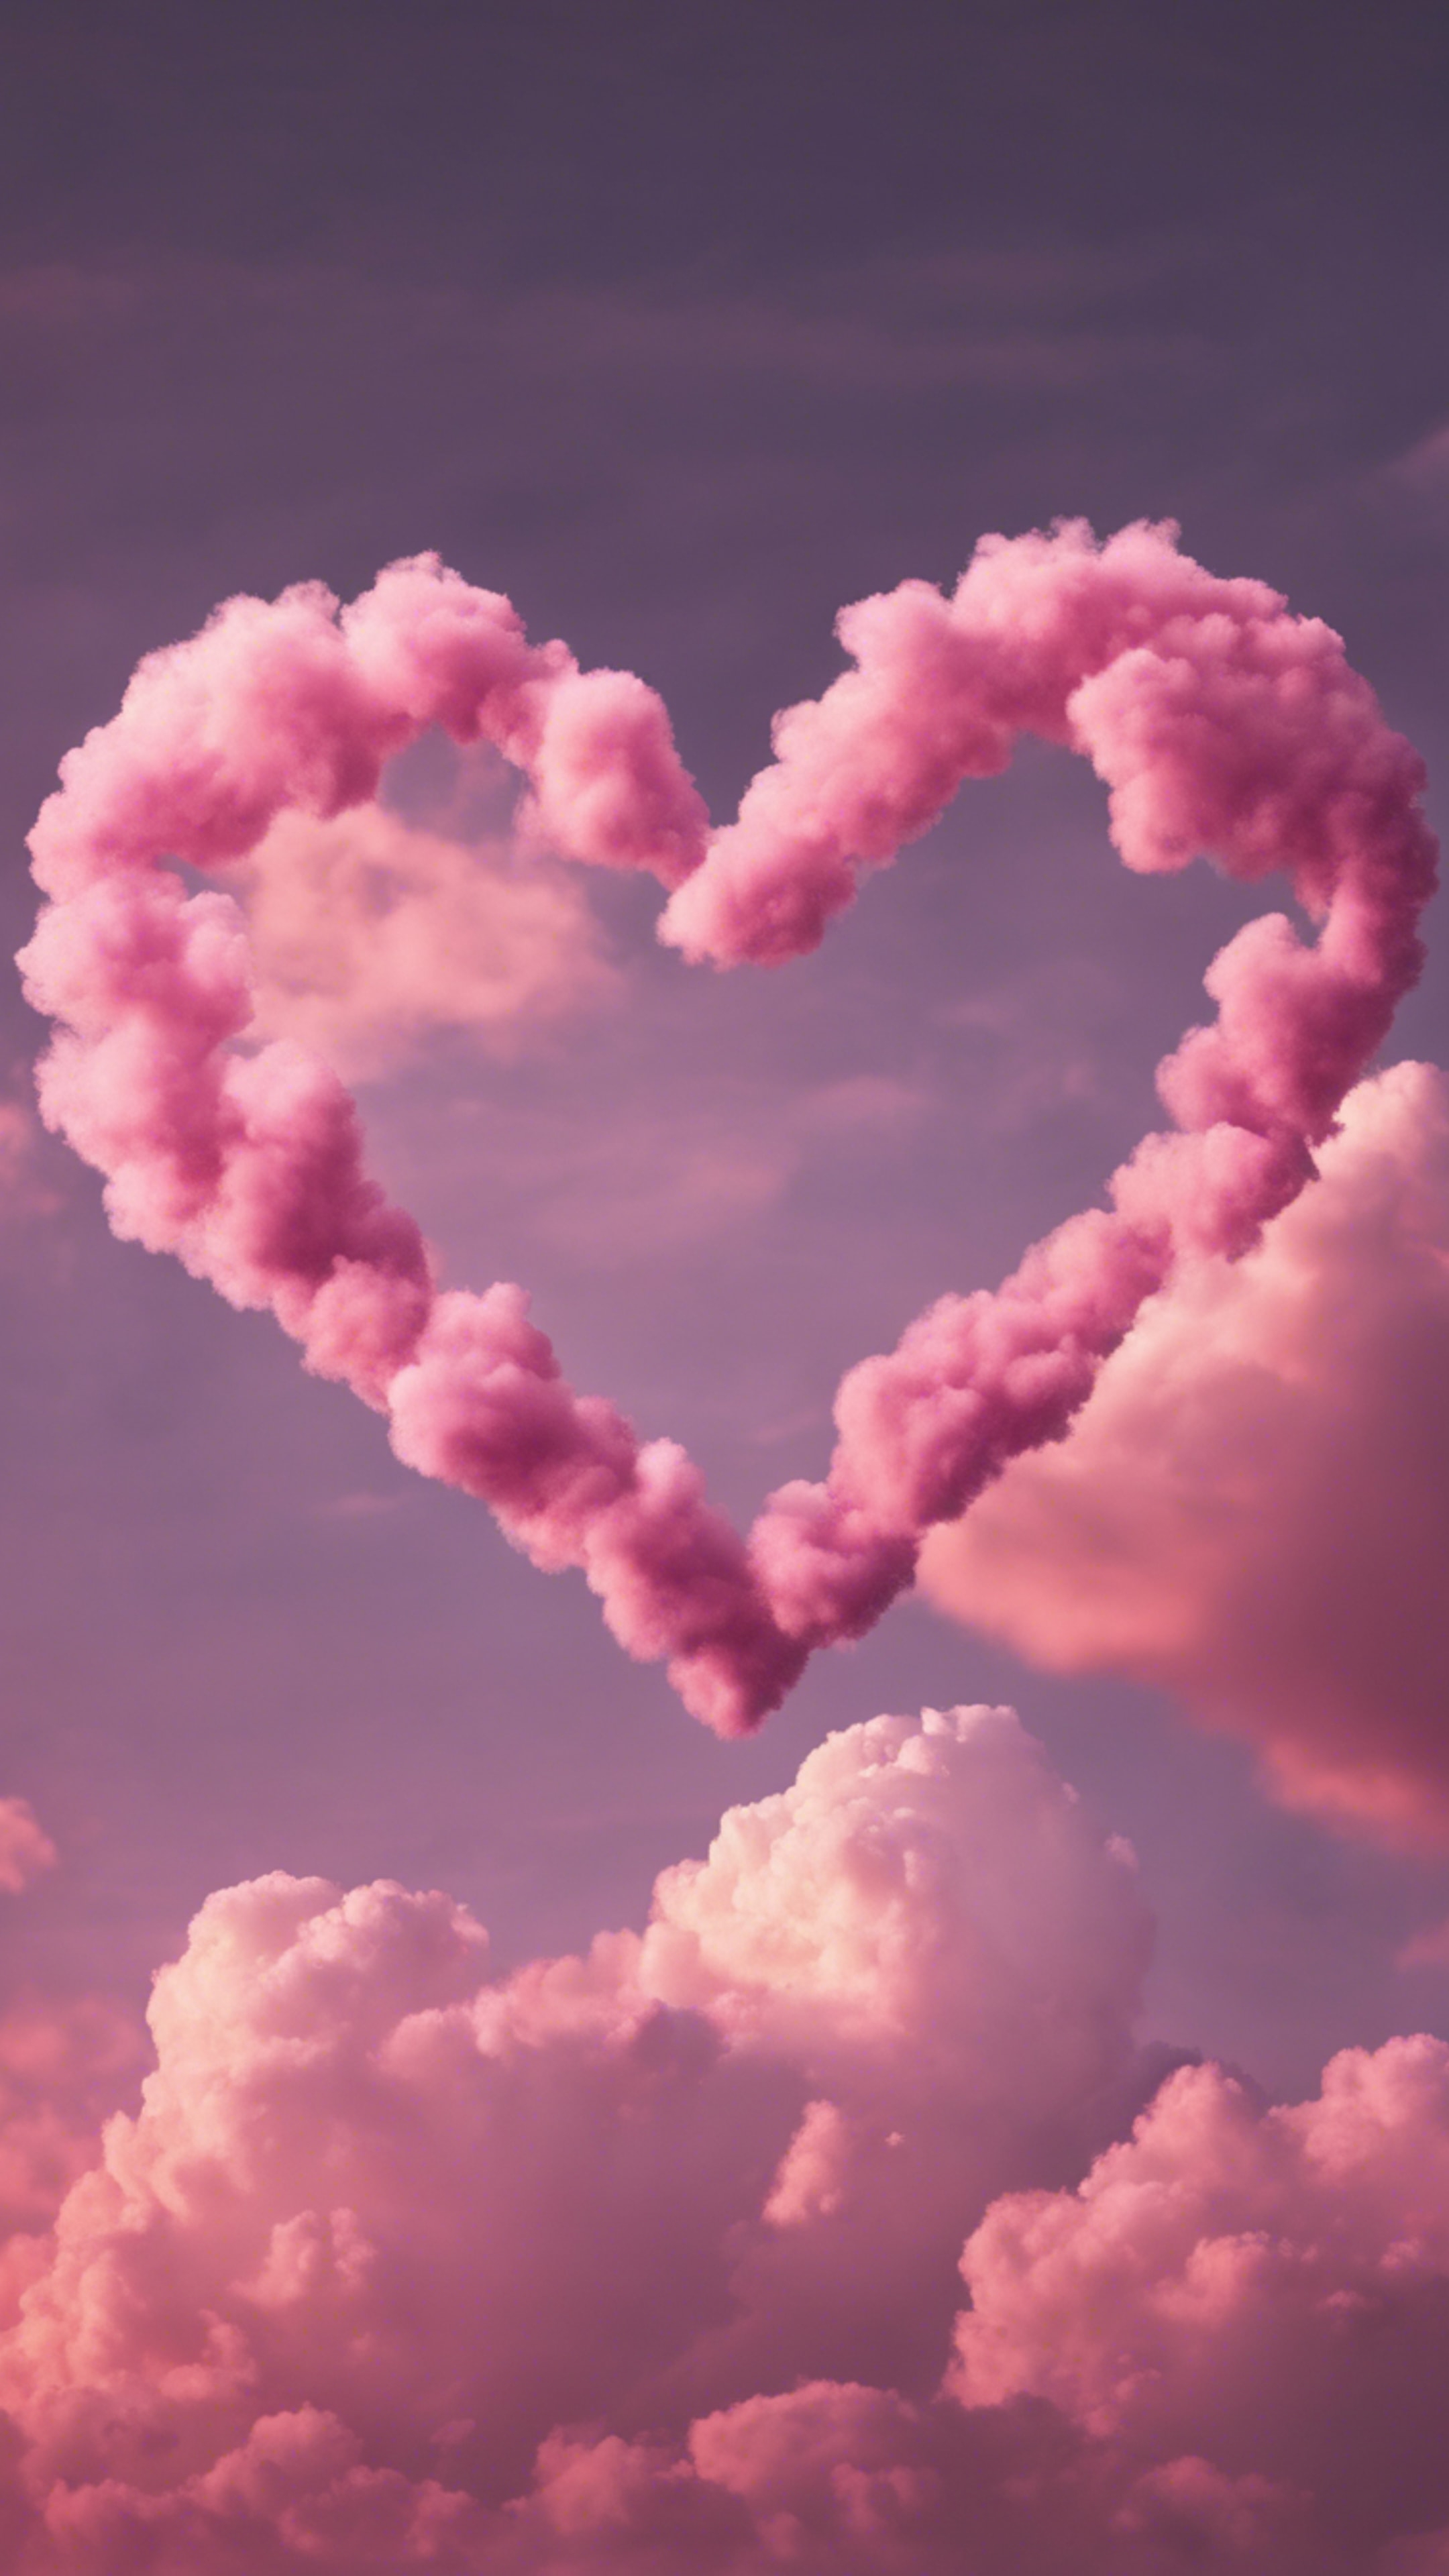 Pink heart-shaped clouds floating in the twilight sky. Hintergrund[eb6690dc48484c9aa4c9]